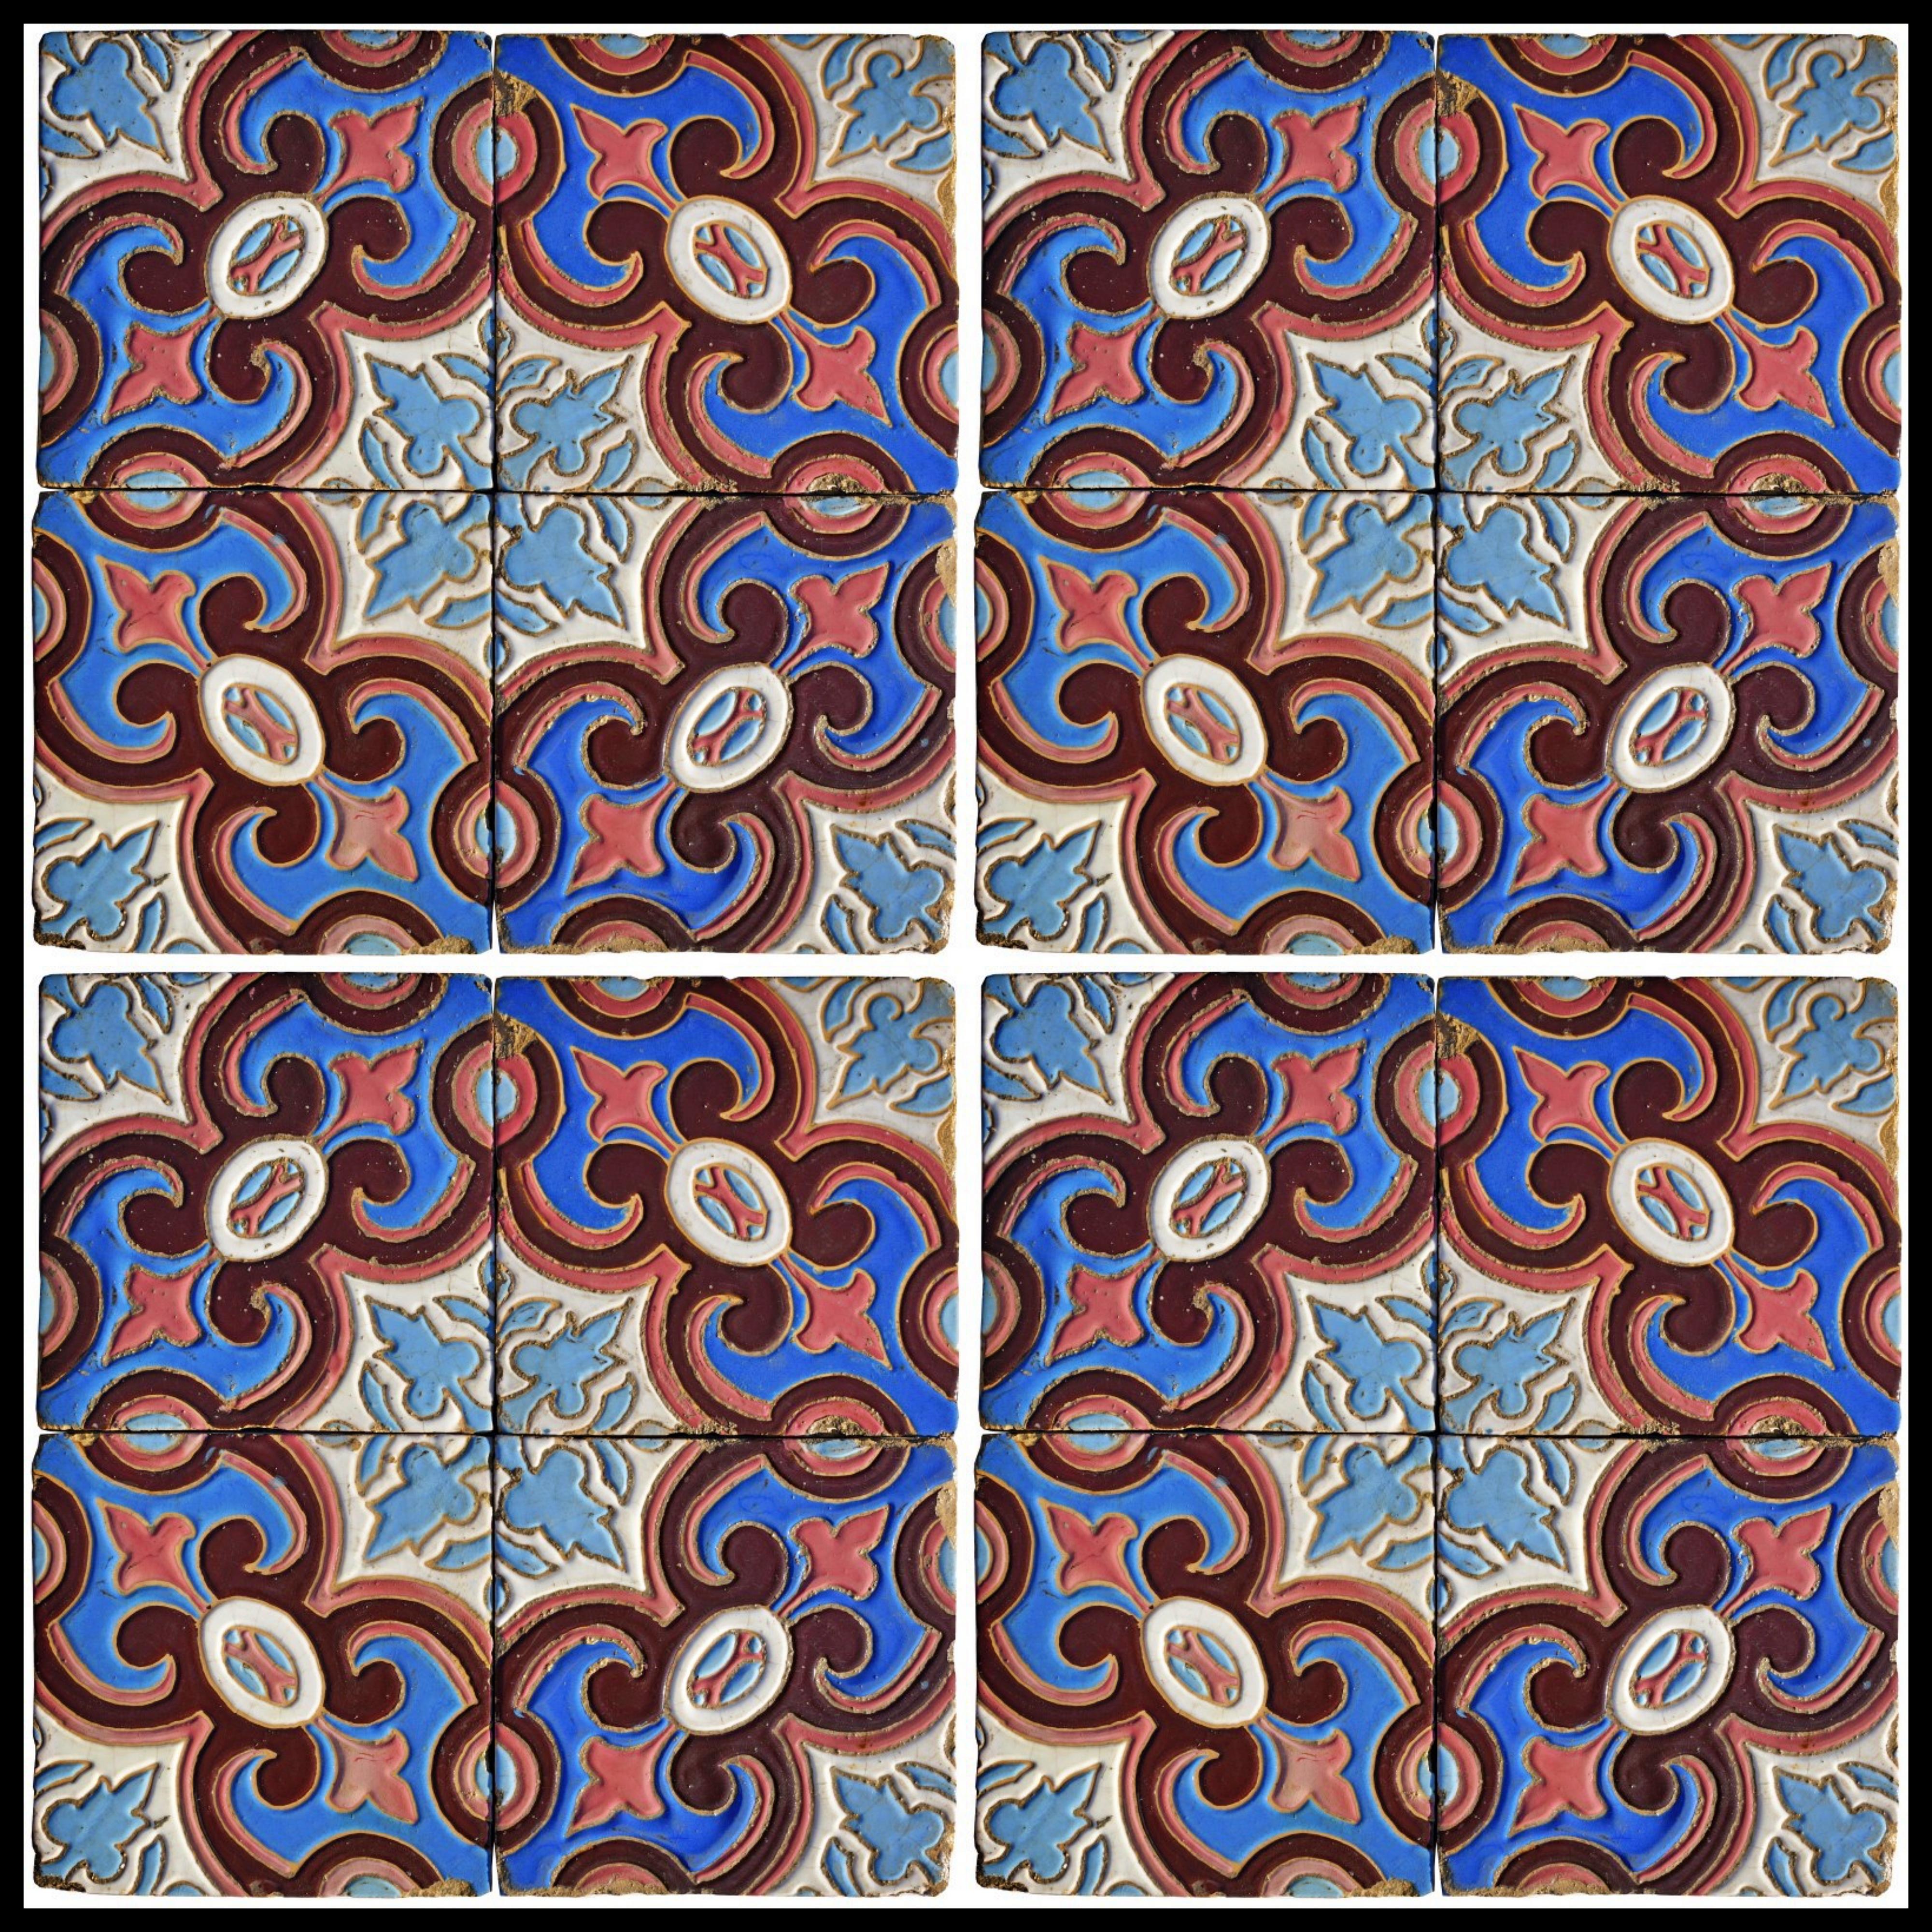 16 ANCIENT MAJOLICA TILES FROM THE LIBERTY ERA 1894 / 1910 Art Nouveau

Original white and manganese relief tile.
Relief tile.

AVAILABILITY OF 142 TILES

HEIGHT 80 cm
WIDTH 80 cm
THICKNESS 1.7 cm
WEIGHT 1.3 Kg
HISTORICAL PERIOD 1894 / 1910 Art